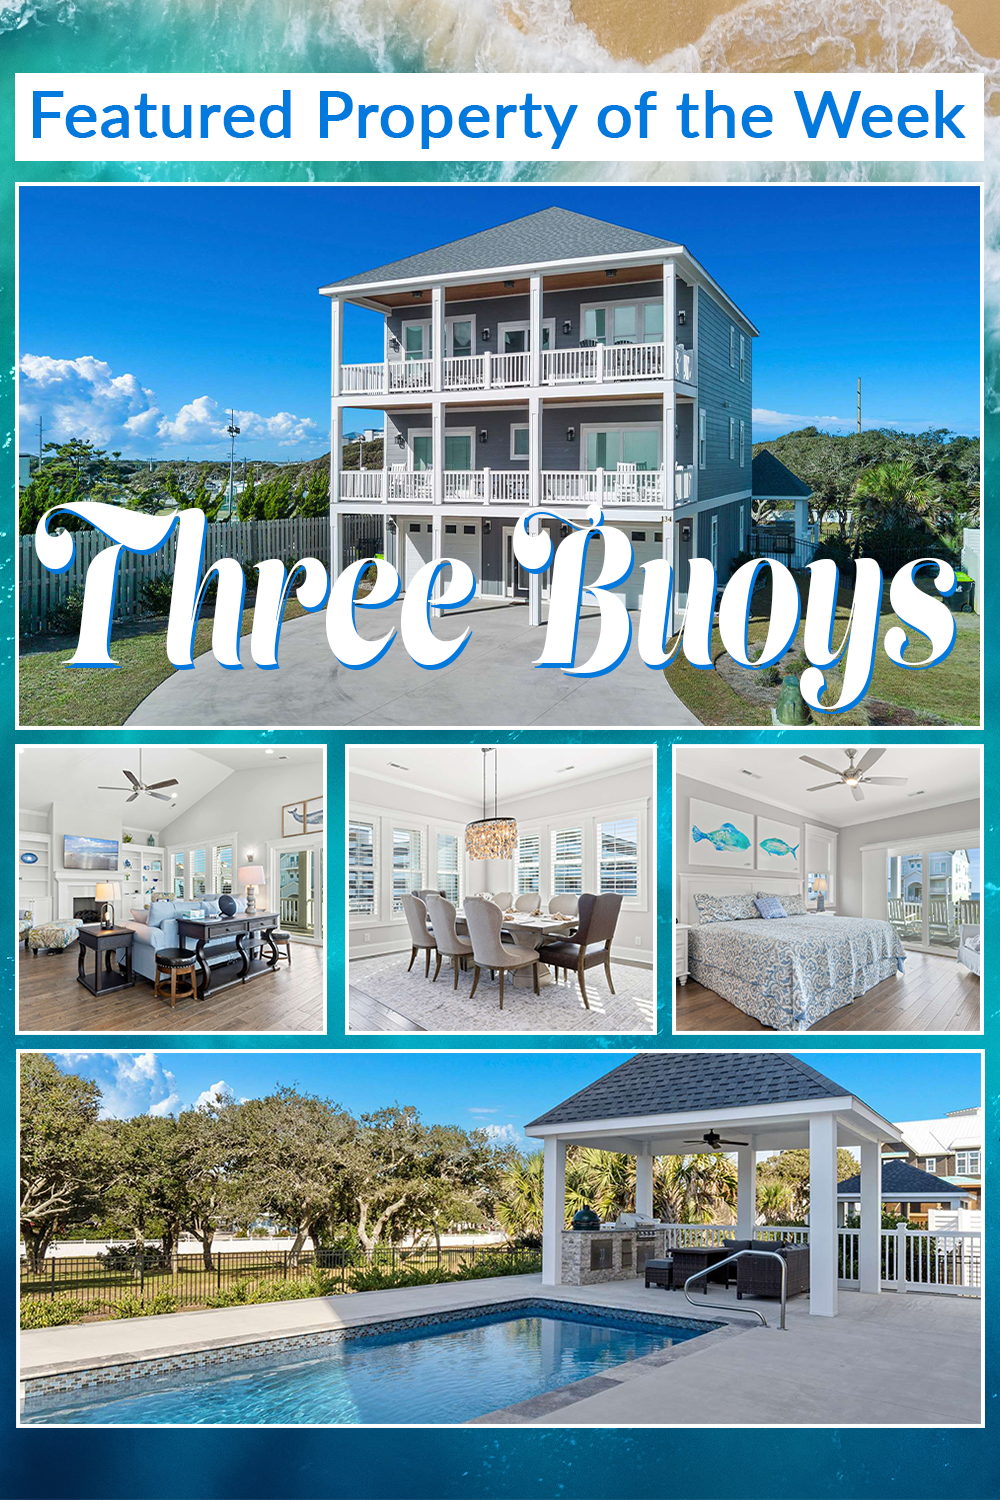 Three Buoys | Emerald Isle Realty Featured Property of the Week